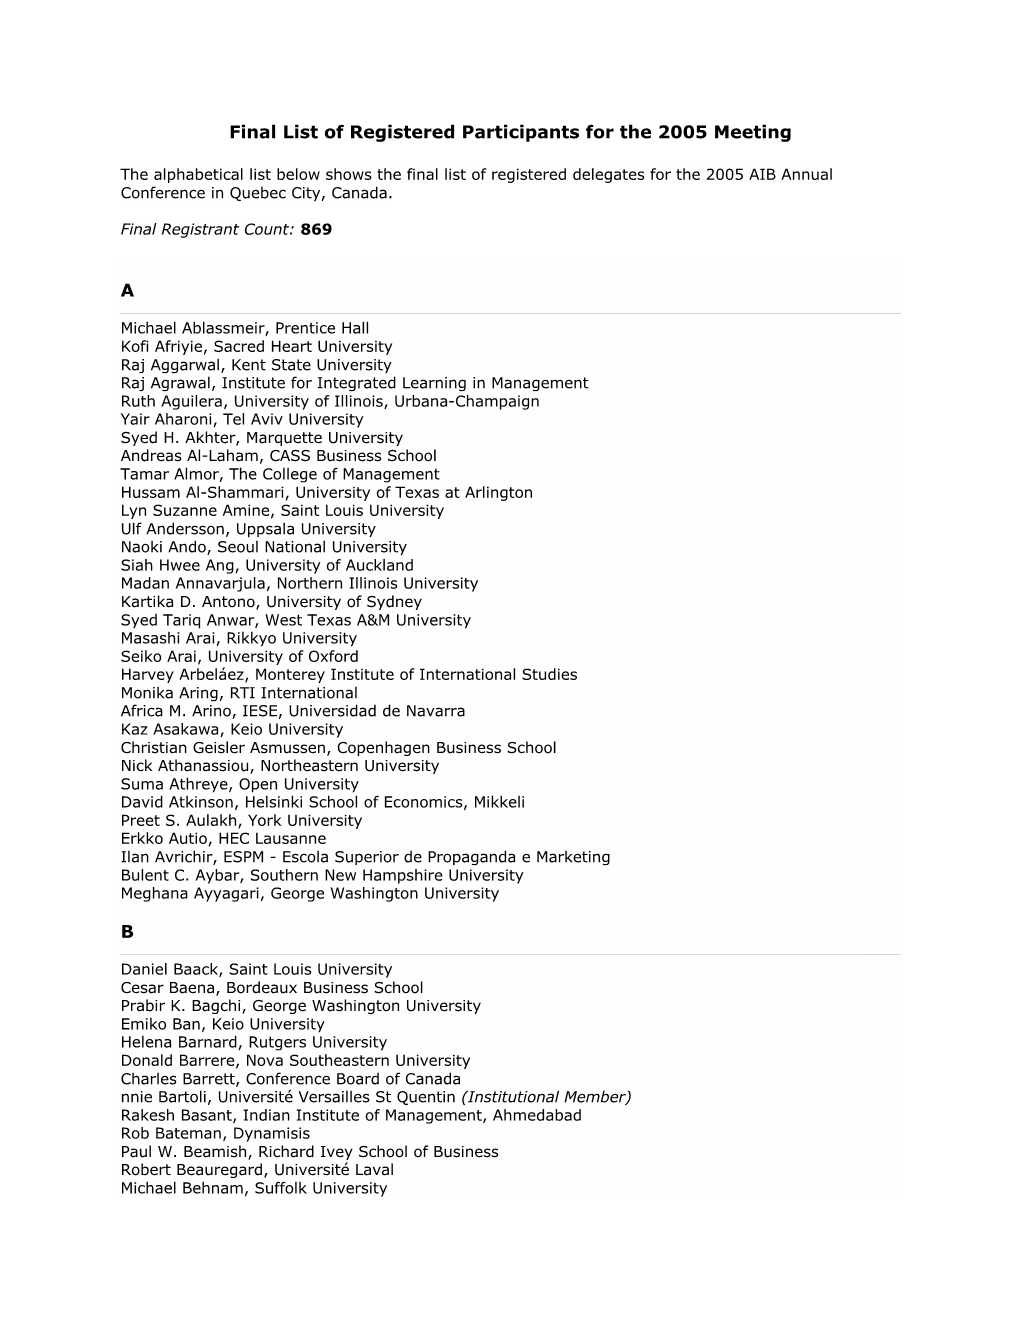 Final List of Registered Participants for the 2005 Meeting